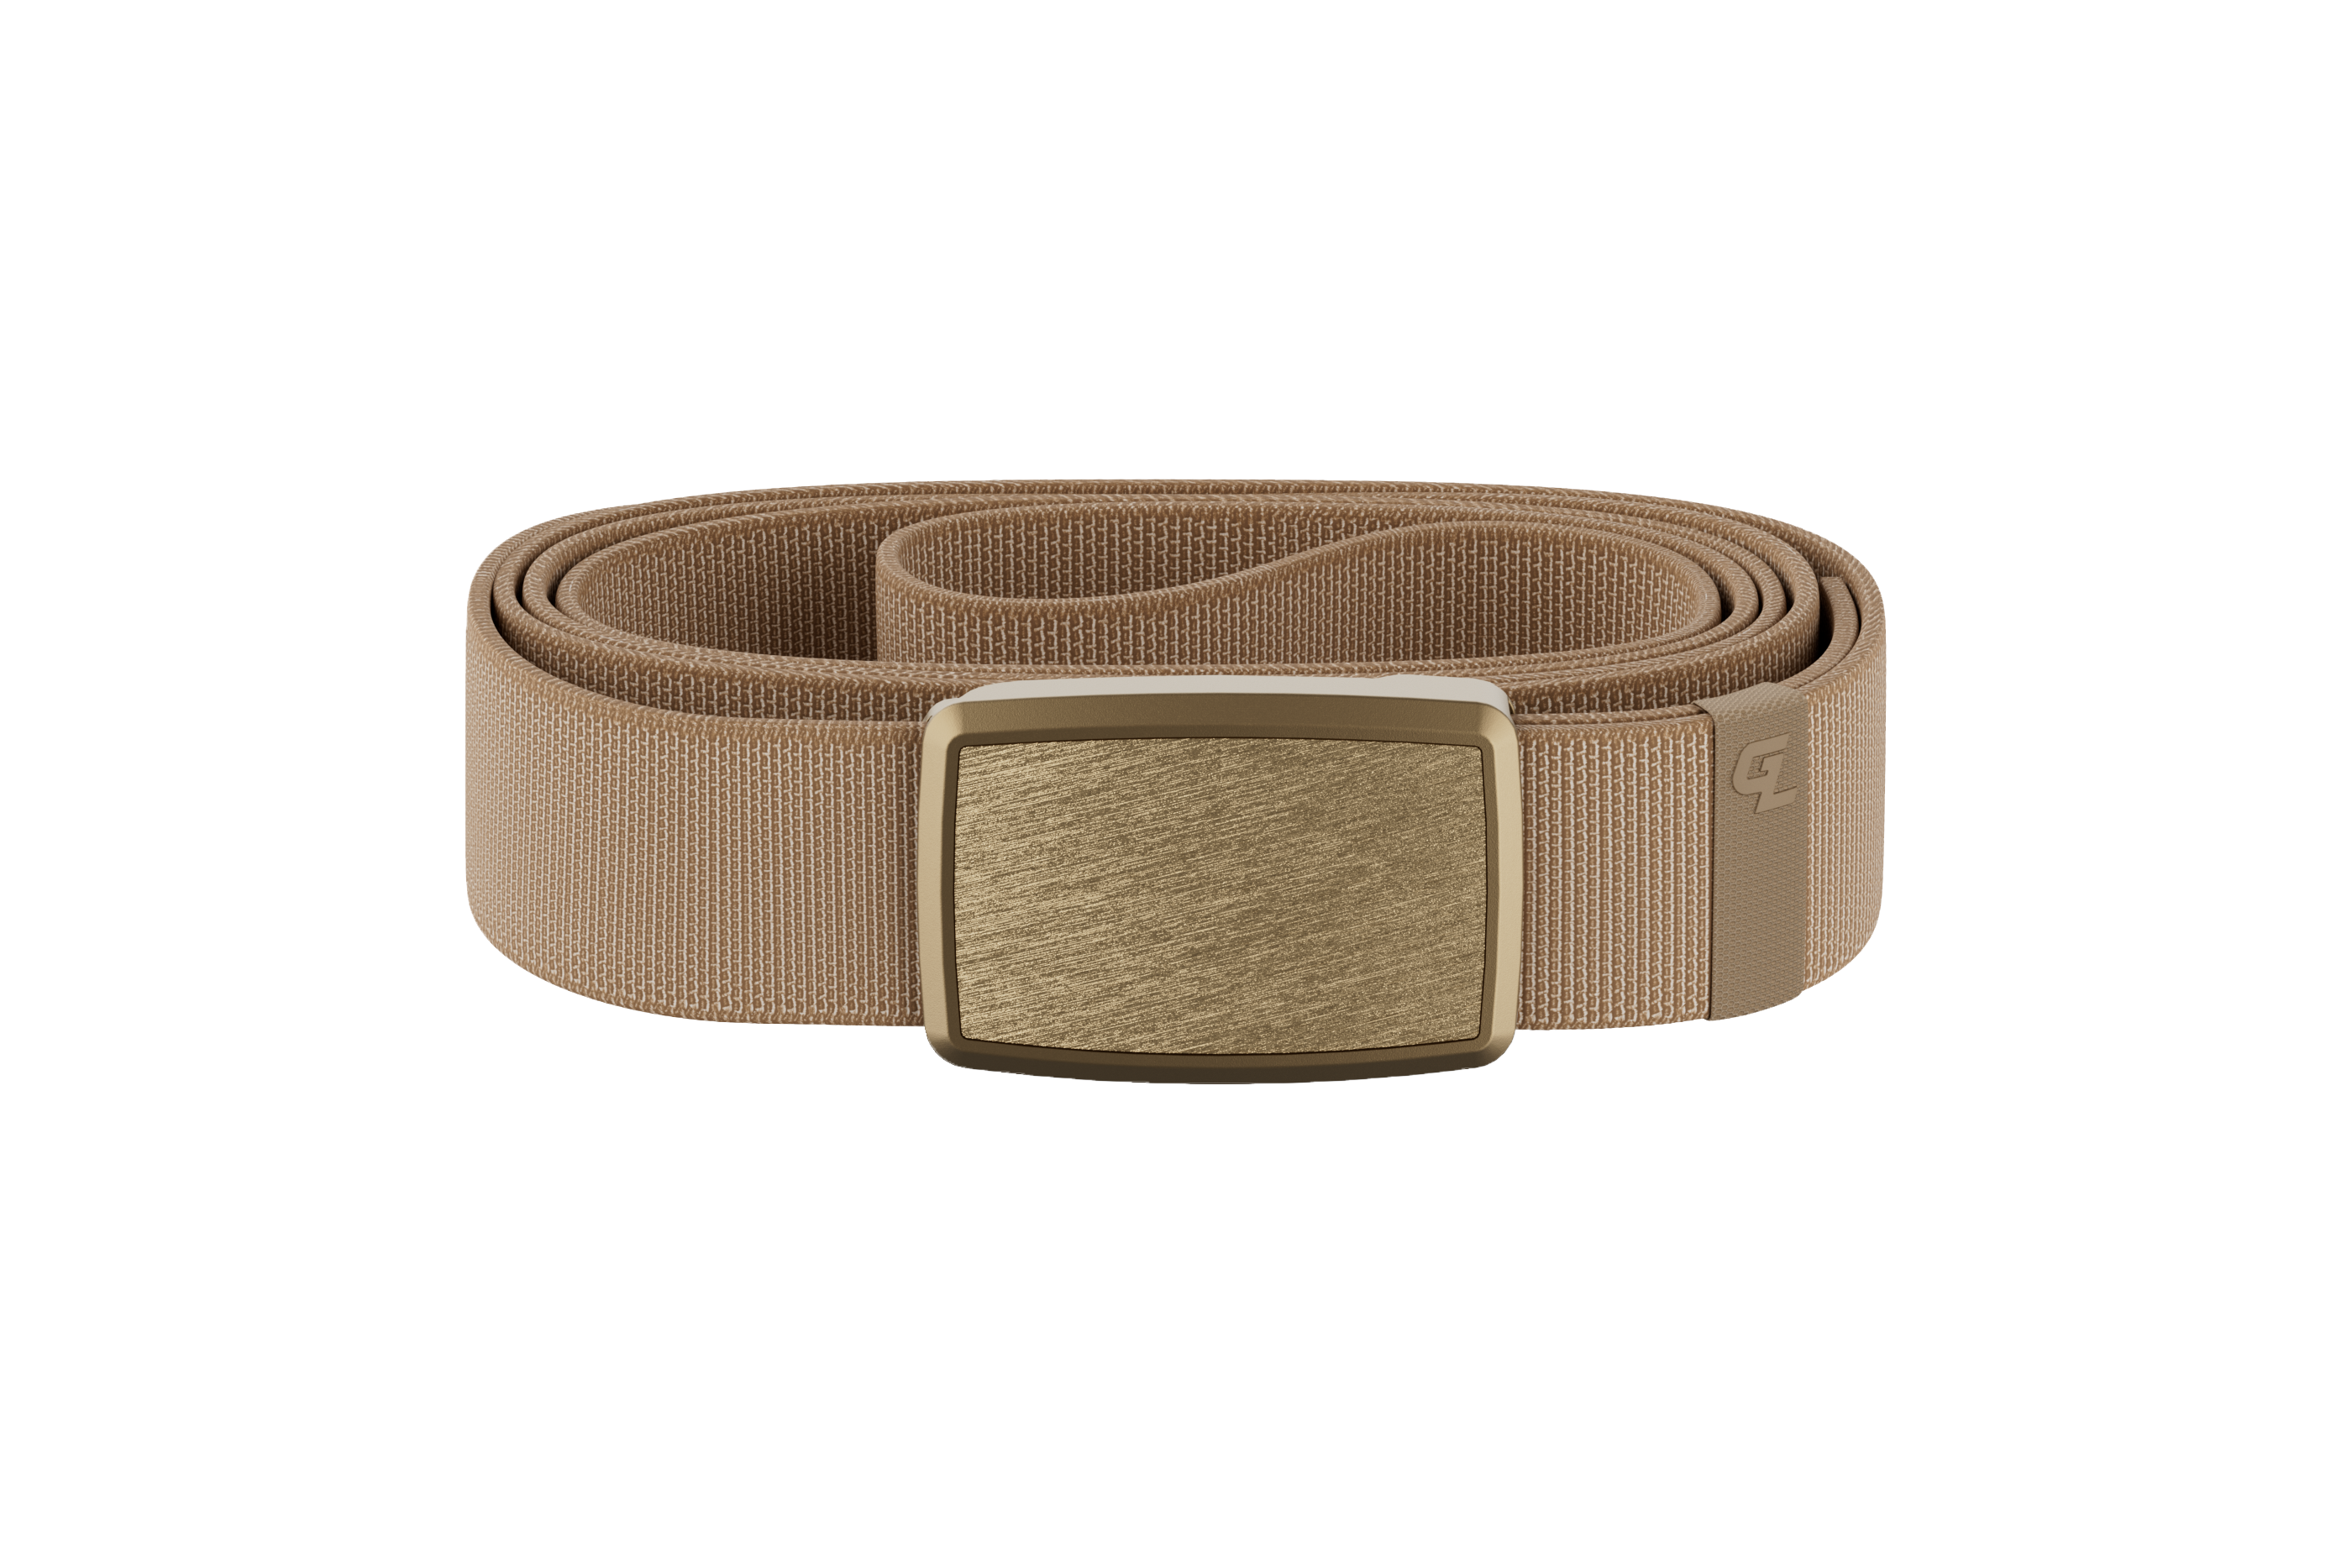 Groove Belt Low Profile - Taupe/Gold View 1